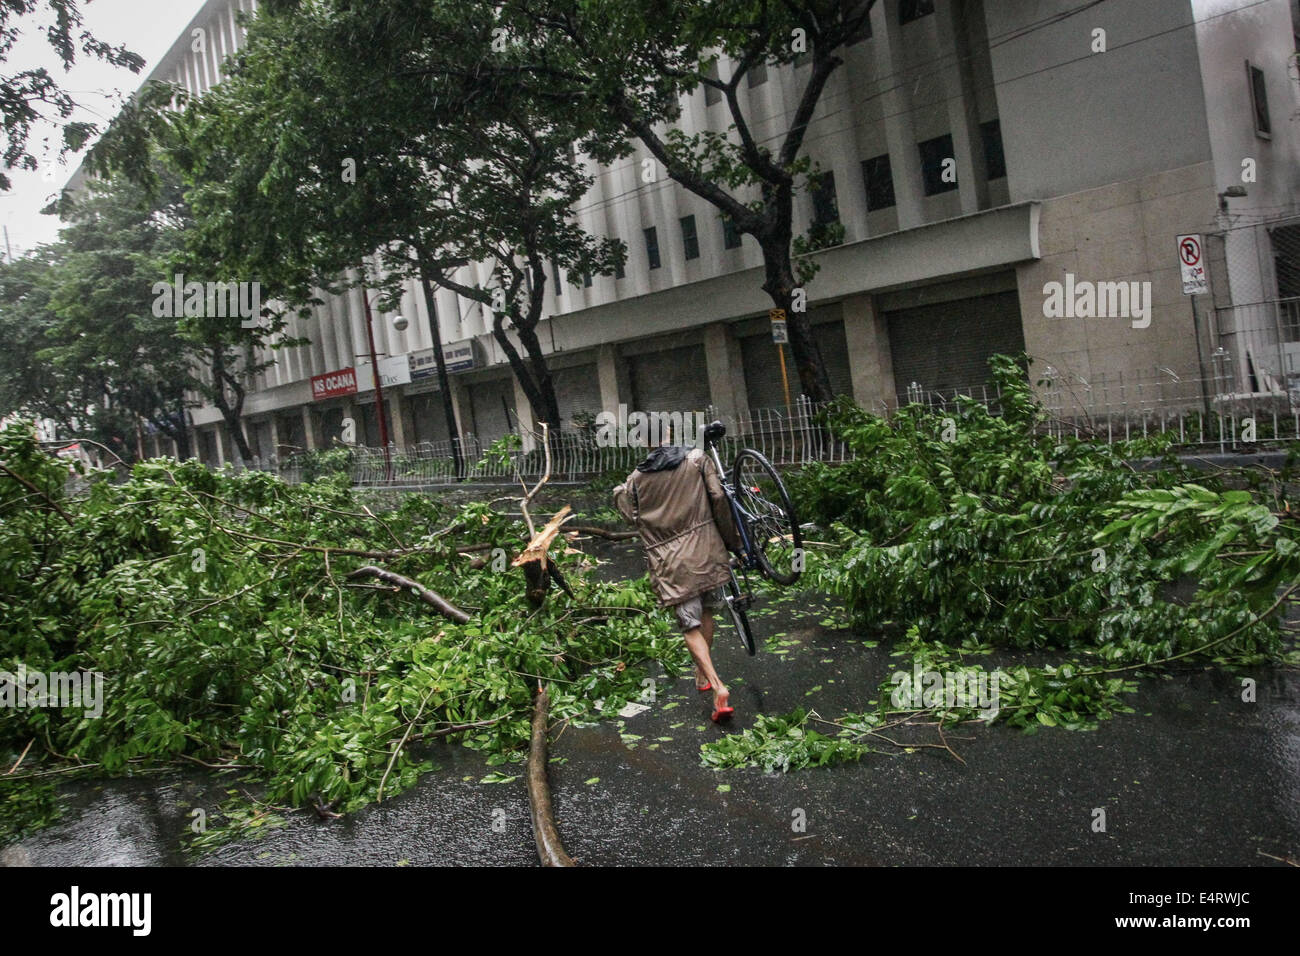 Manila, Philippines. 16th July, 2014. A man carries his bicycle past debris of tree brought down by Typhoon Rammasun on July 16, 2014. Typhoon Rammasun (locally known as Glenda) had maximum sustained winds of 150 kph and gustiness of up to 185 kph when it hit Metro Manila. Across the country, about 400,000 people had fled their homes and sheltered in evacuation centers, according to the disaster management council. Credit:  ZUMA Press, Inc./Alamy Live News Stock Photo